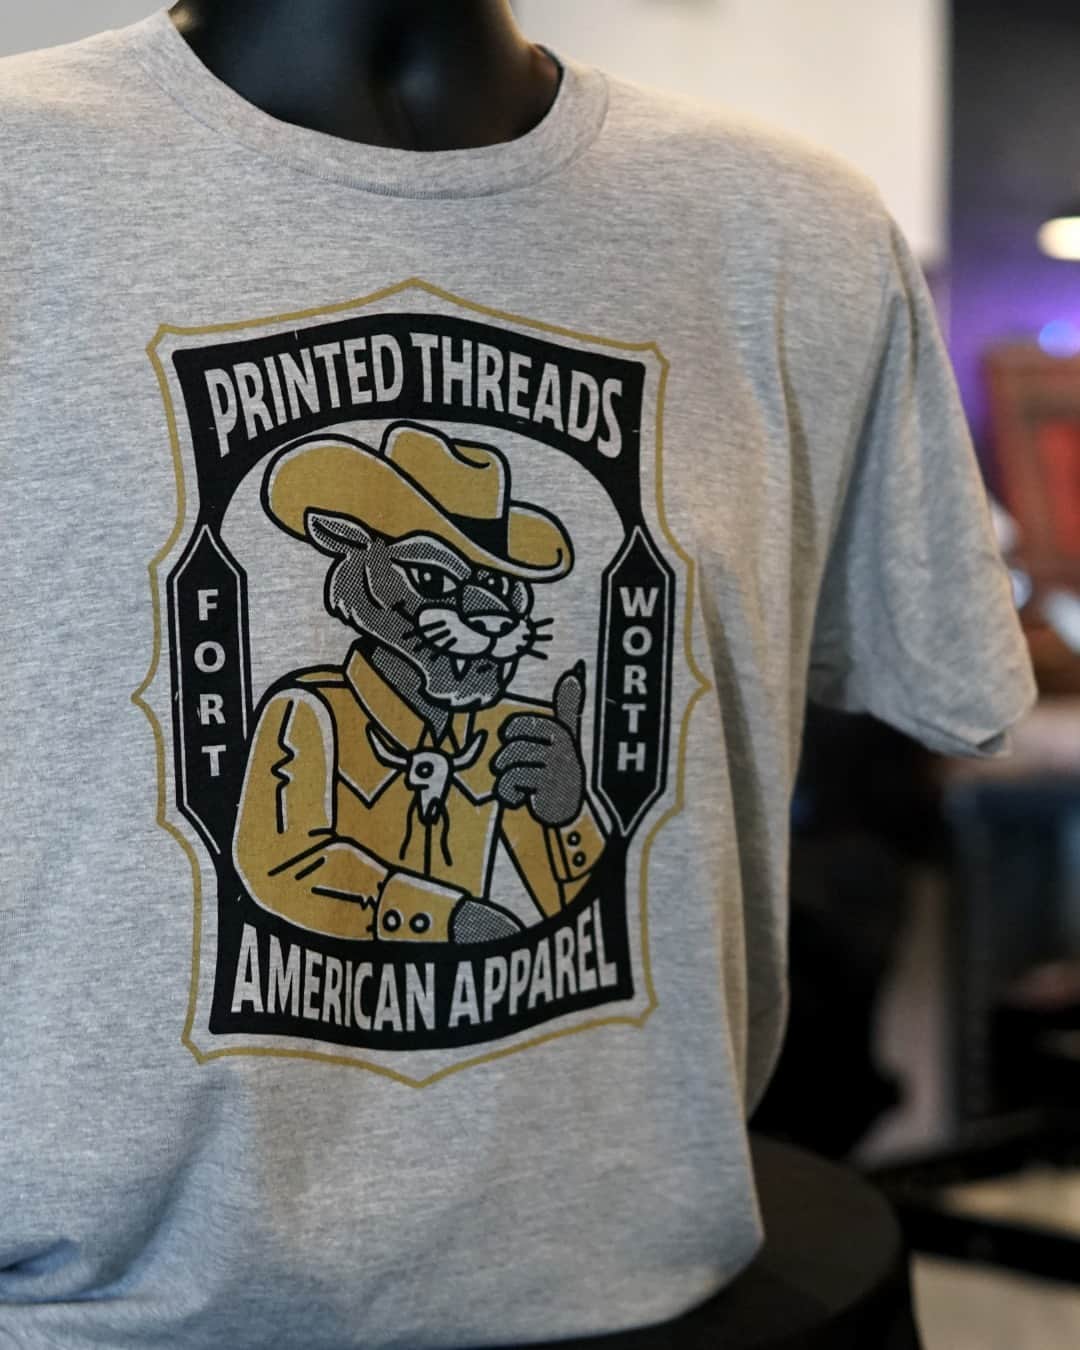 American Apparelのインスタグラム：「Throwing it back to stop #7 of the Creative LAAb Printwear Tour in Fort Worth Texas. Swipe to see @printedthreads epic custom AA tees.  #AmericanApparel #AmericanApparelWholesale #WholesaleApparel #Printwear #FallApparel #ScreenPrint #DTG #DirectToFilm」